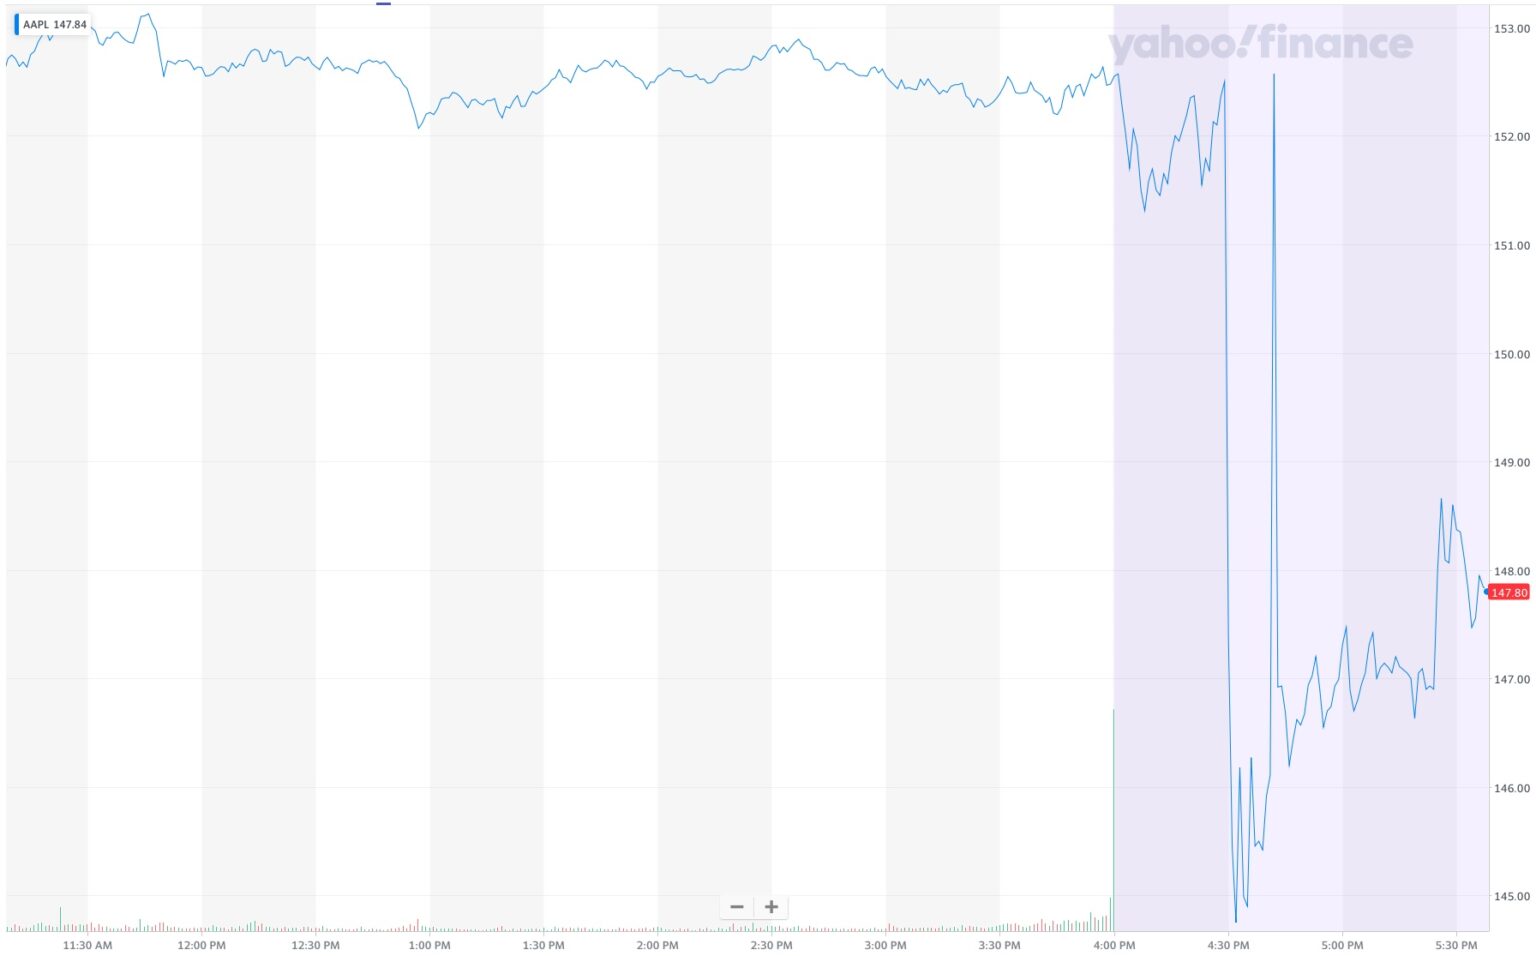 Apple stock chart after Oct earnings